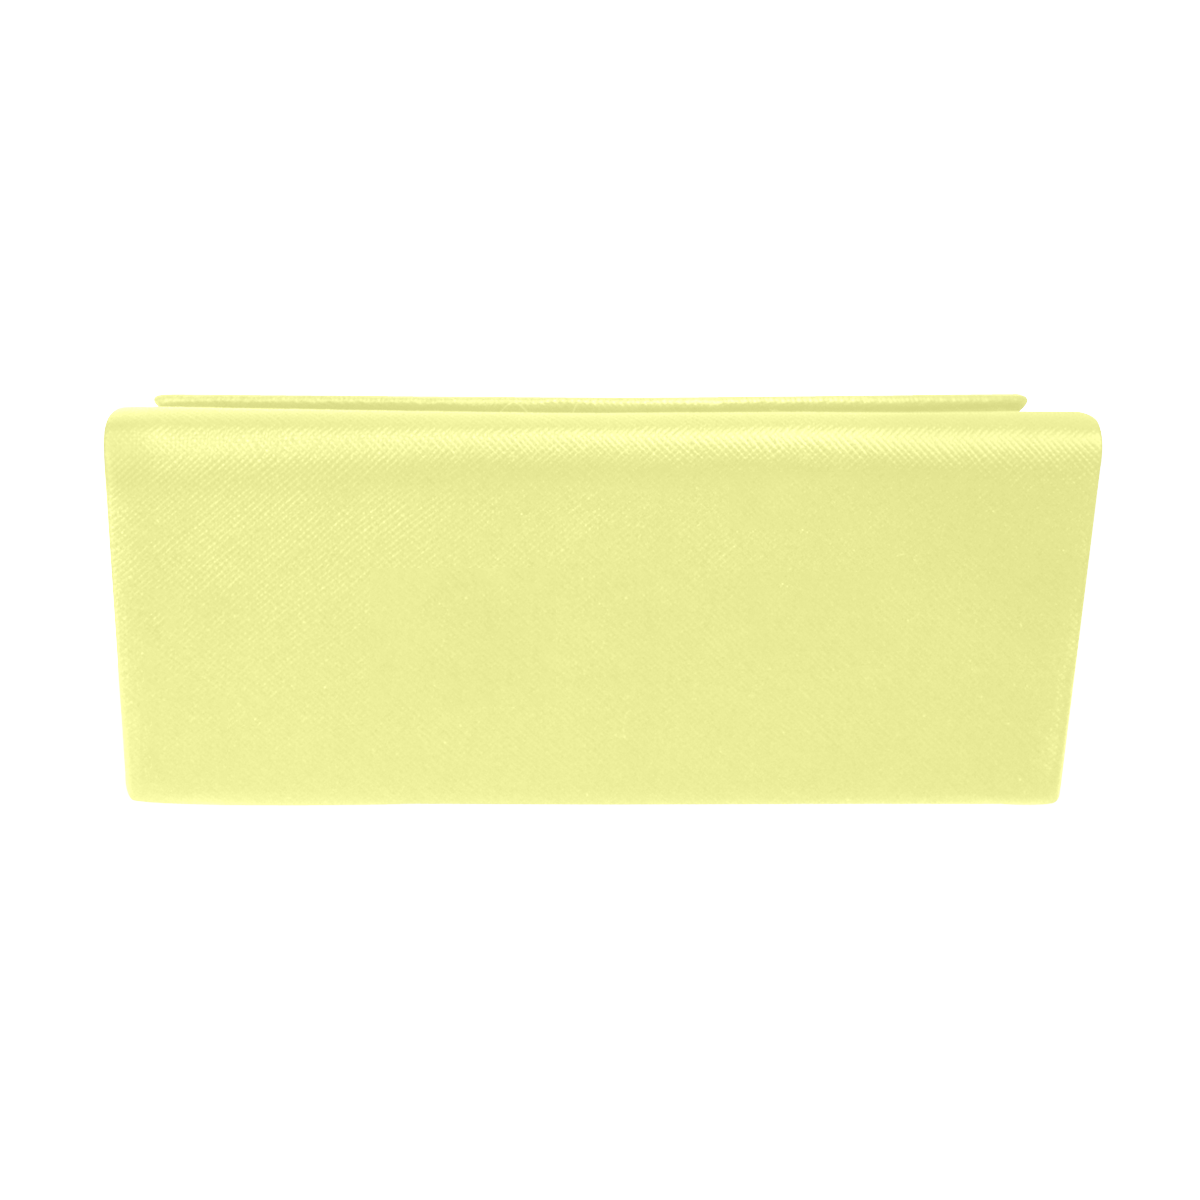 color canary yellow Custom Foldable Glasses Case